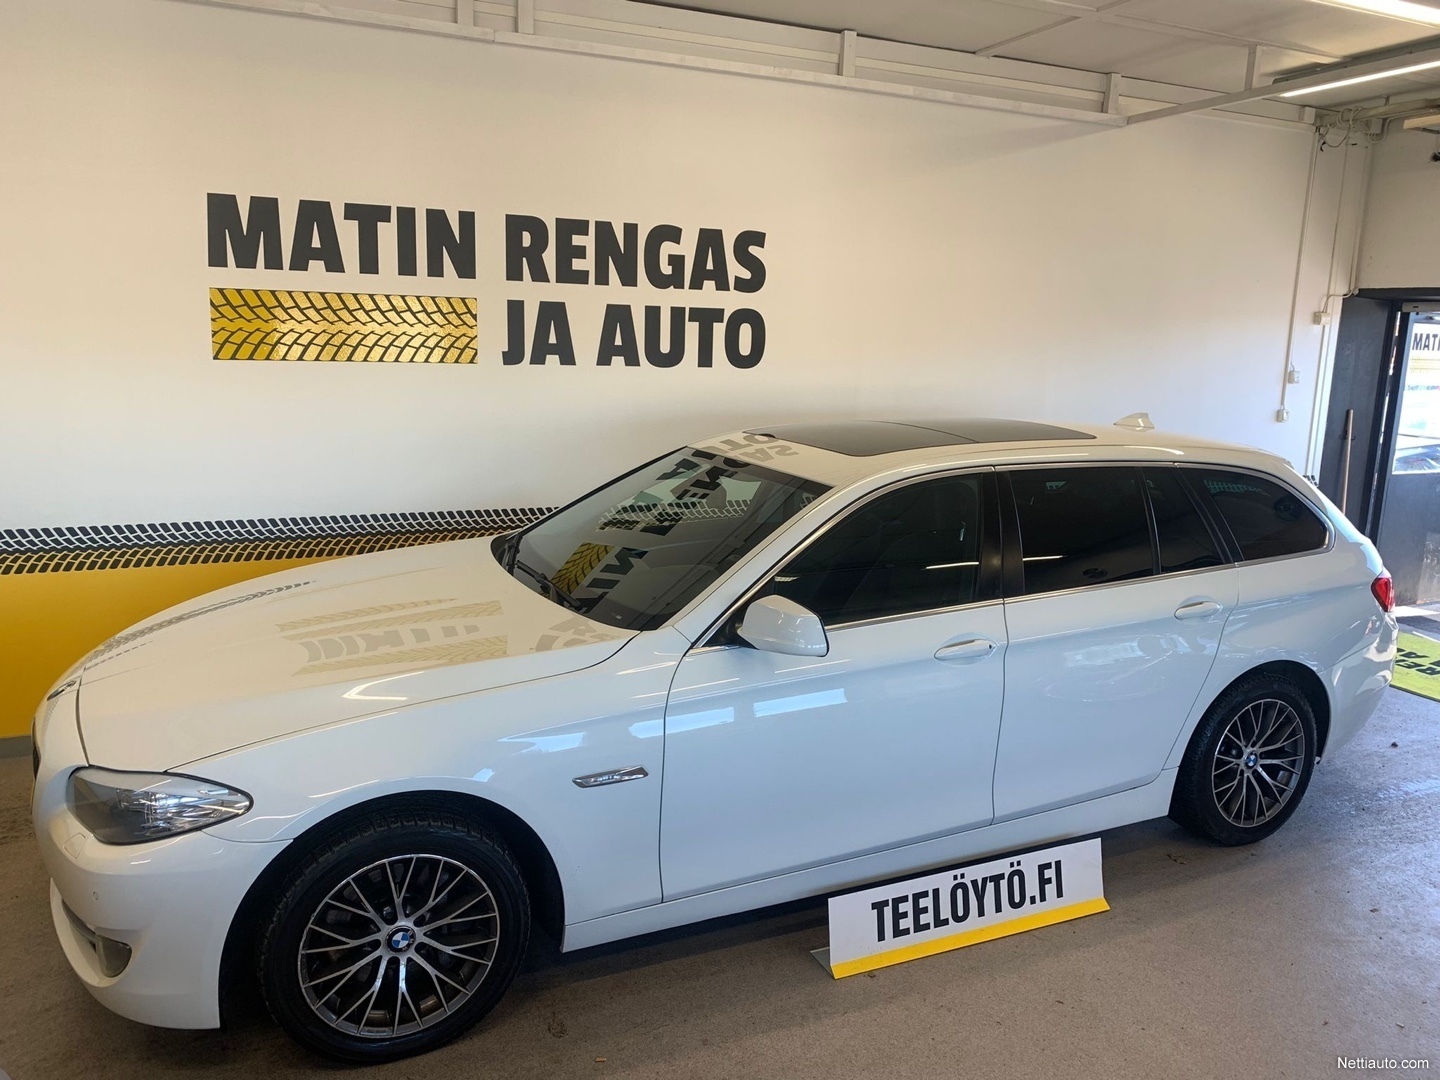 BMW 525 TwinPower Turbo A xDrive F11 Touring Business Automatic Edition -  Matin Rengas ja Auto Oy